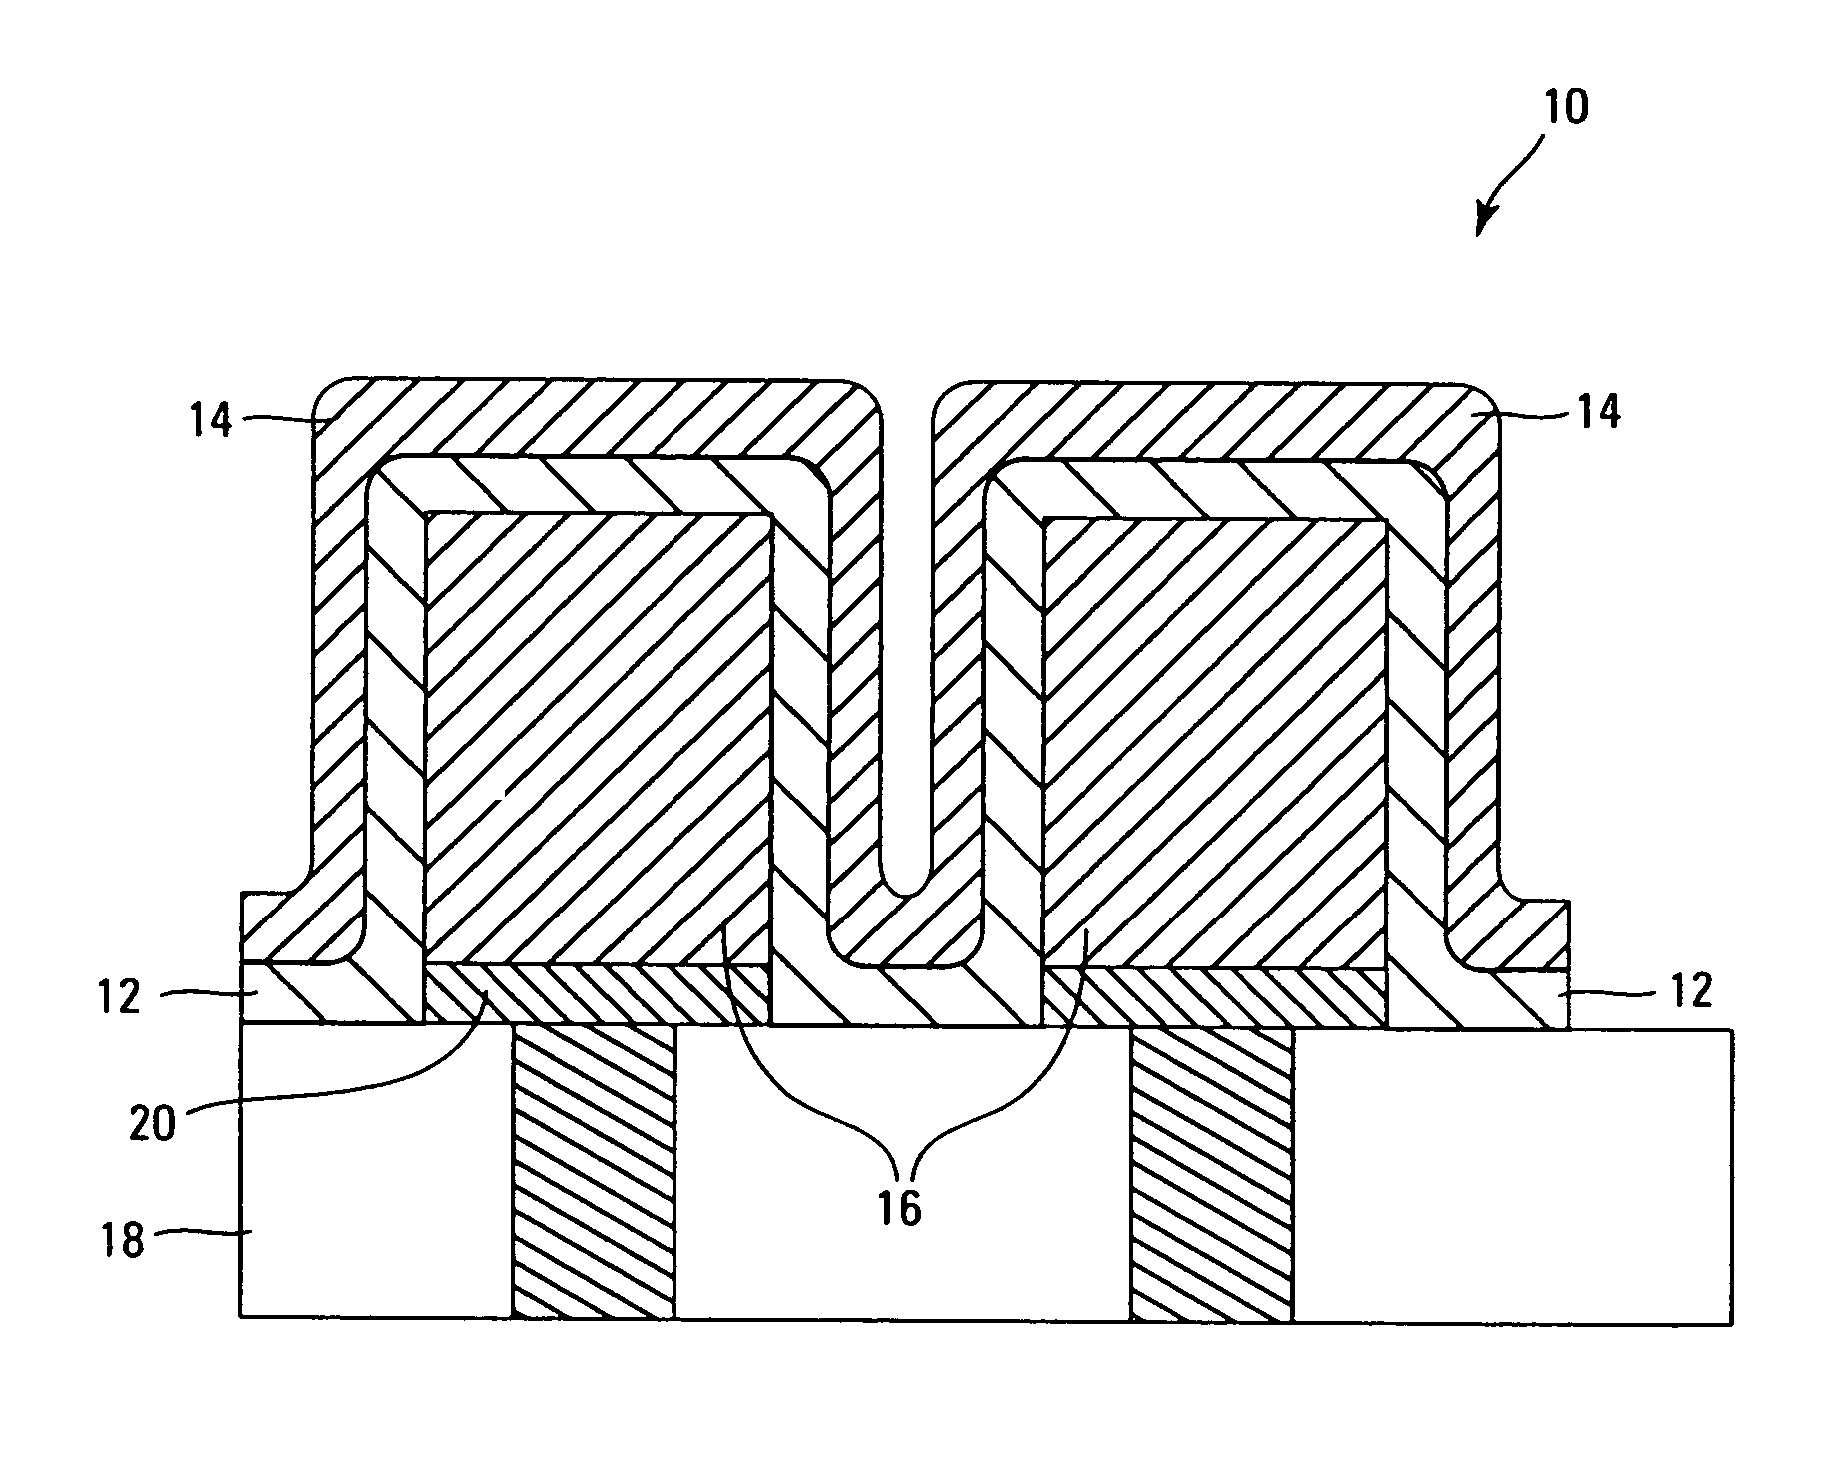 Systems and methods for forming strontium- and/or barium-containing layers